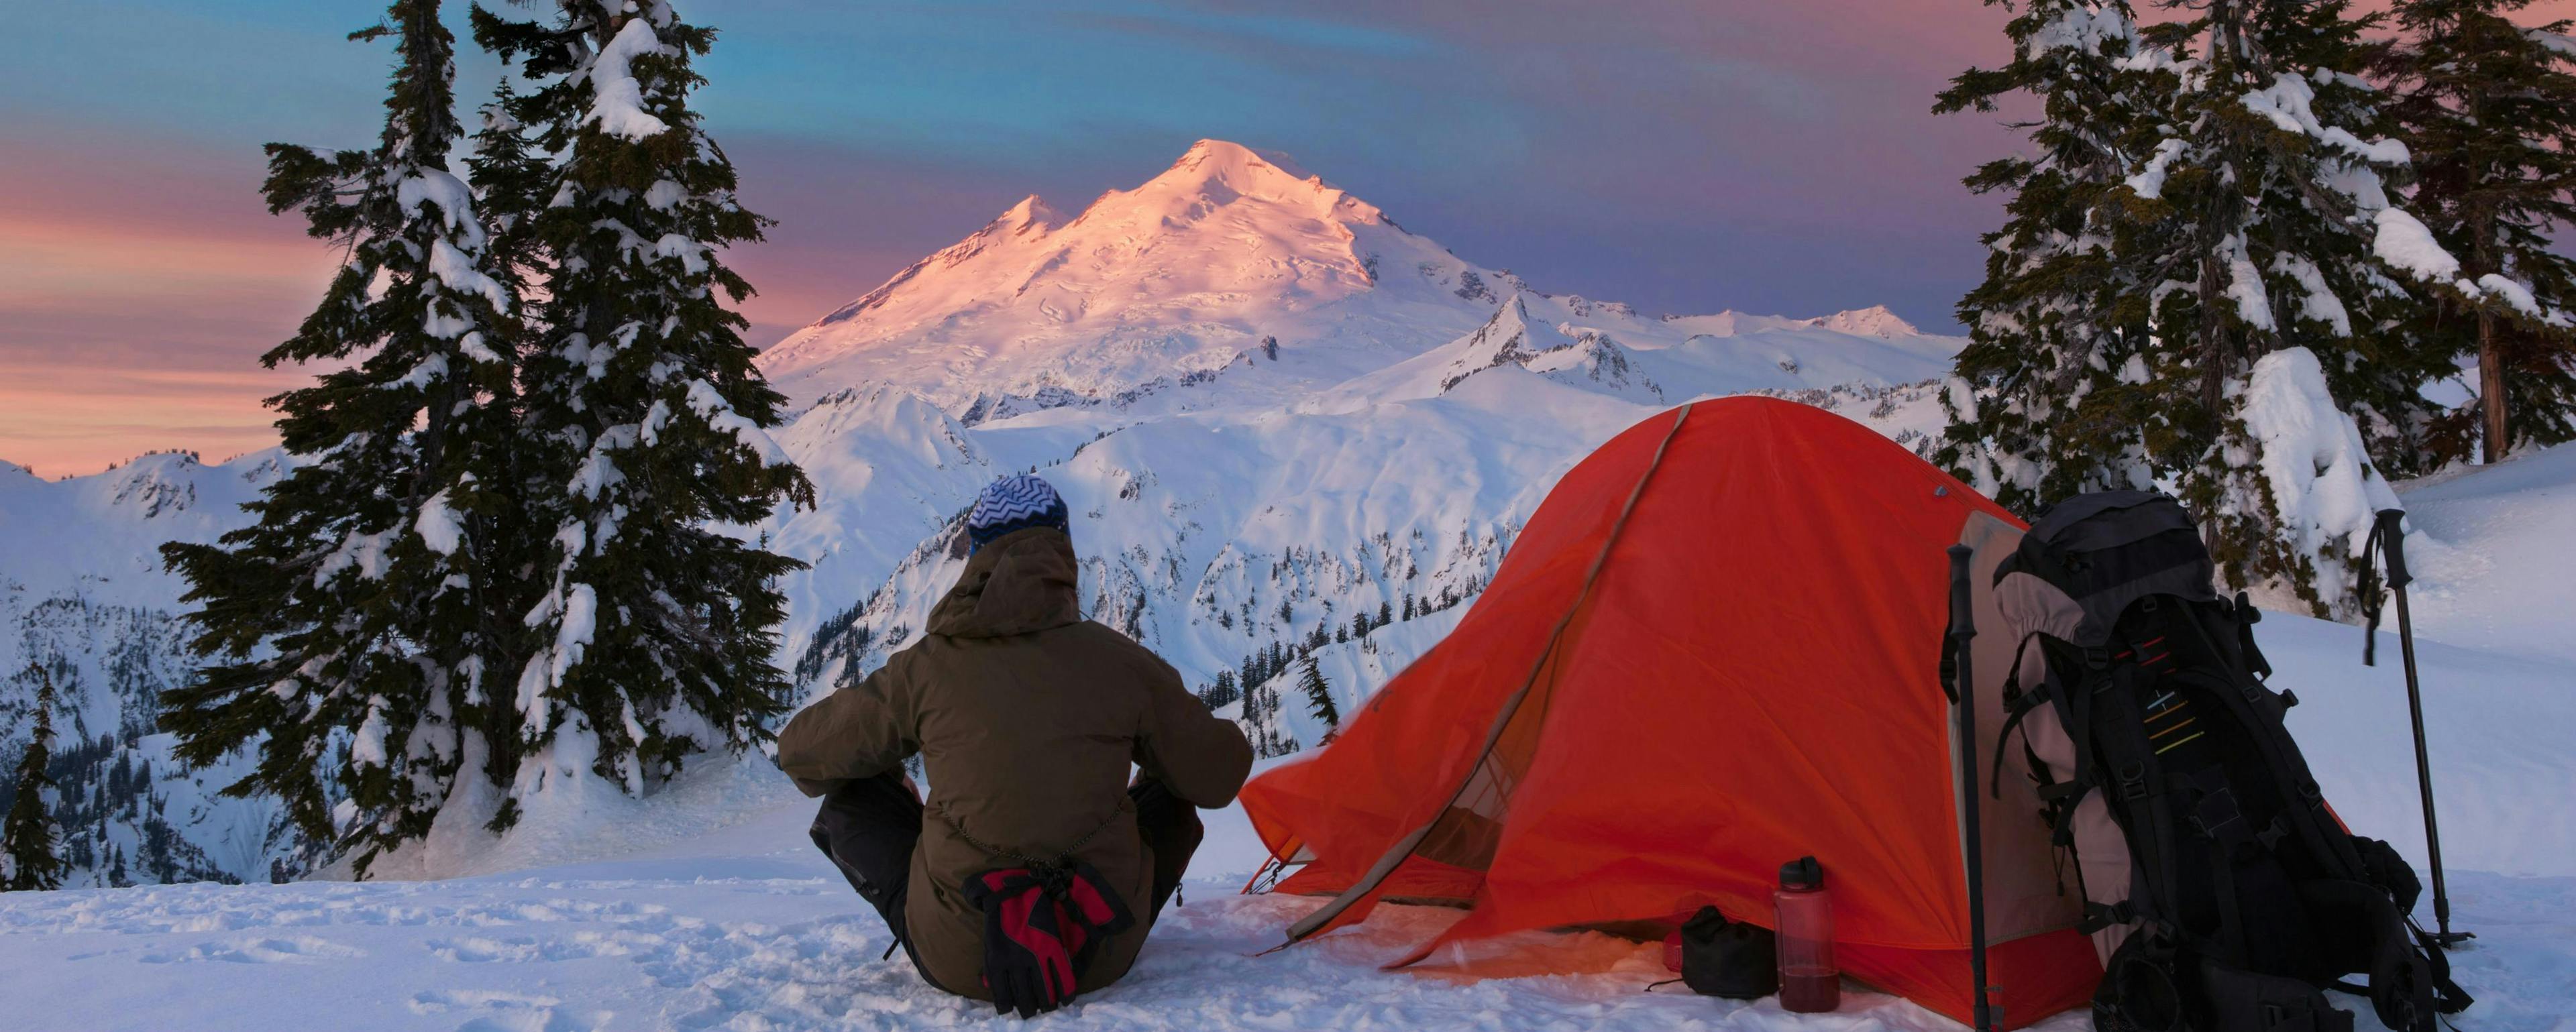 Where to go winter camping near the Rockies